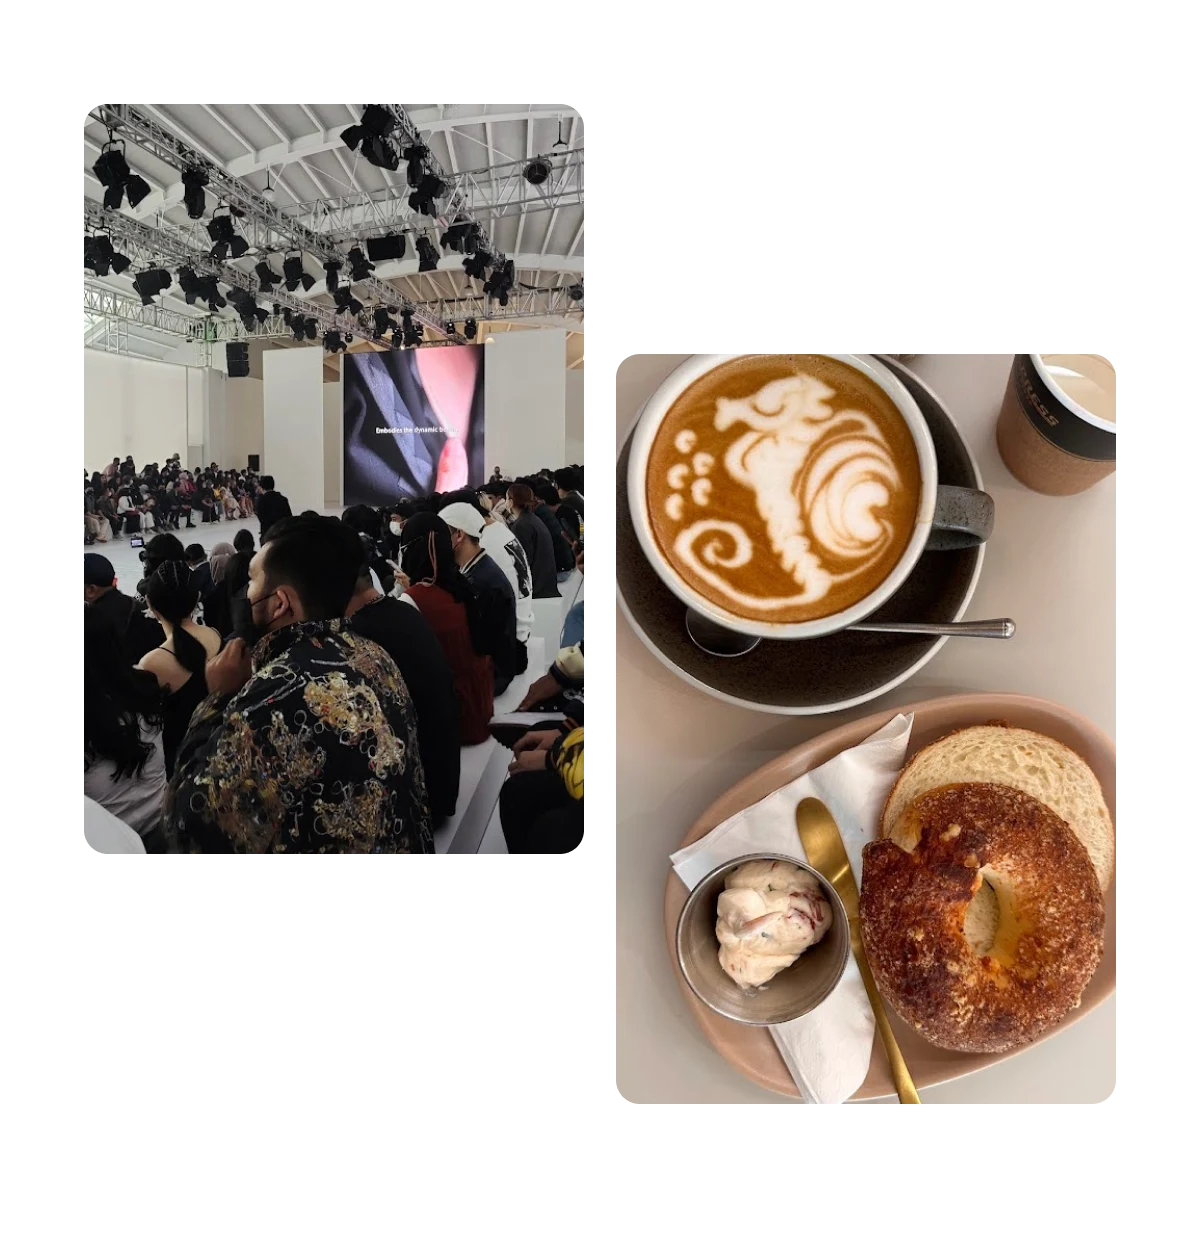 Two pins, people at popular event, and coffee and pastry